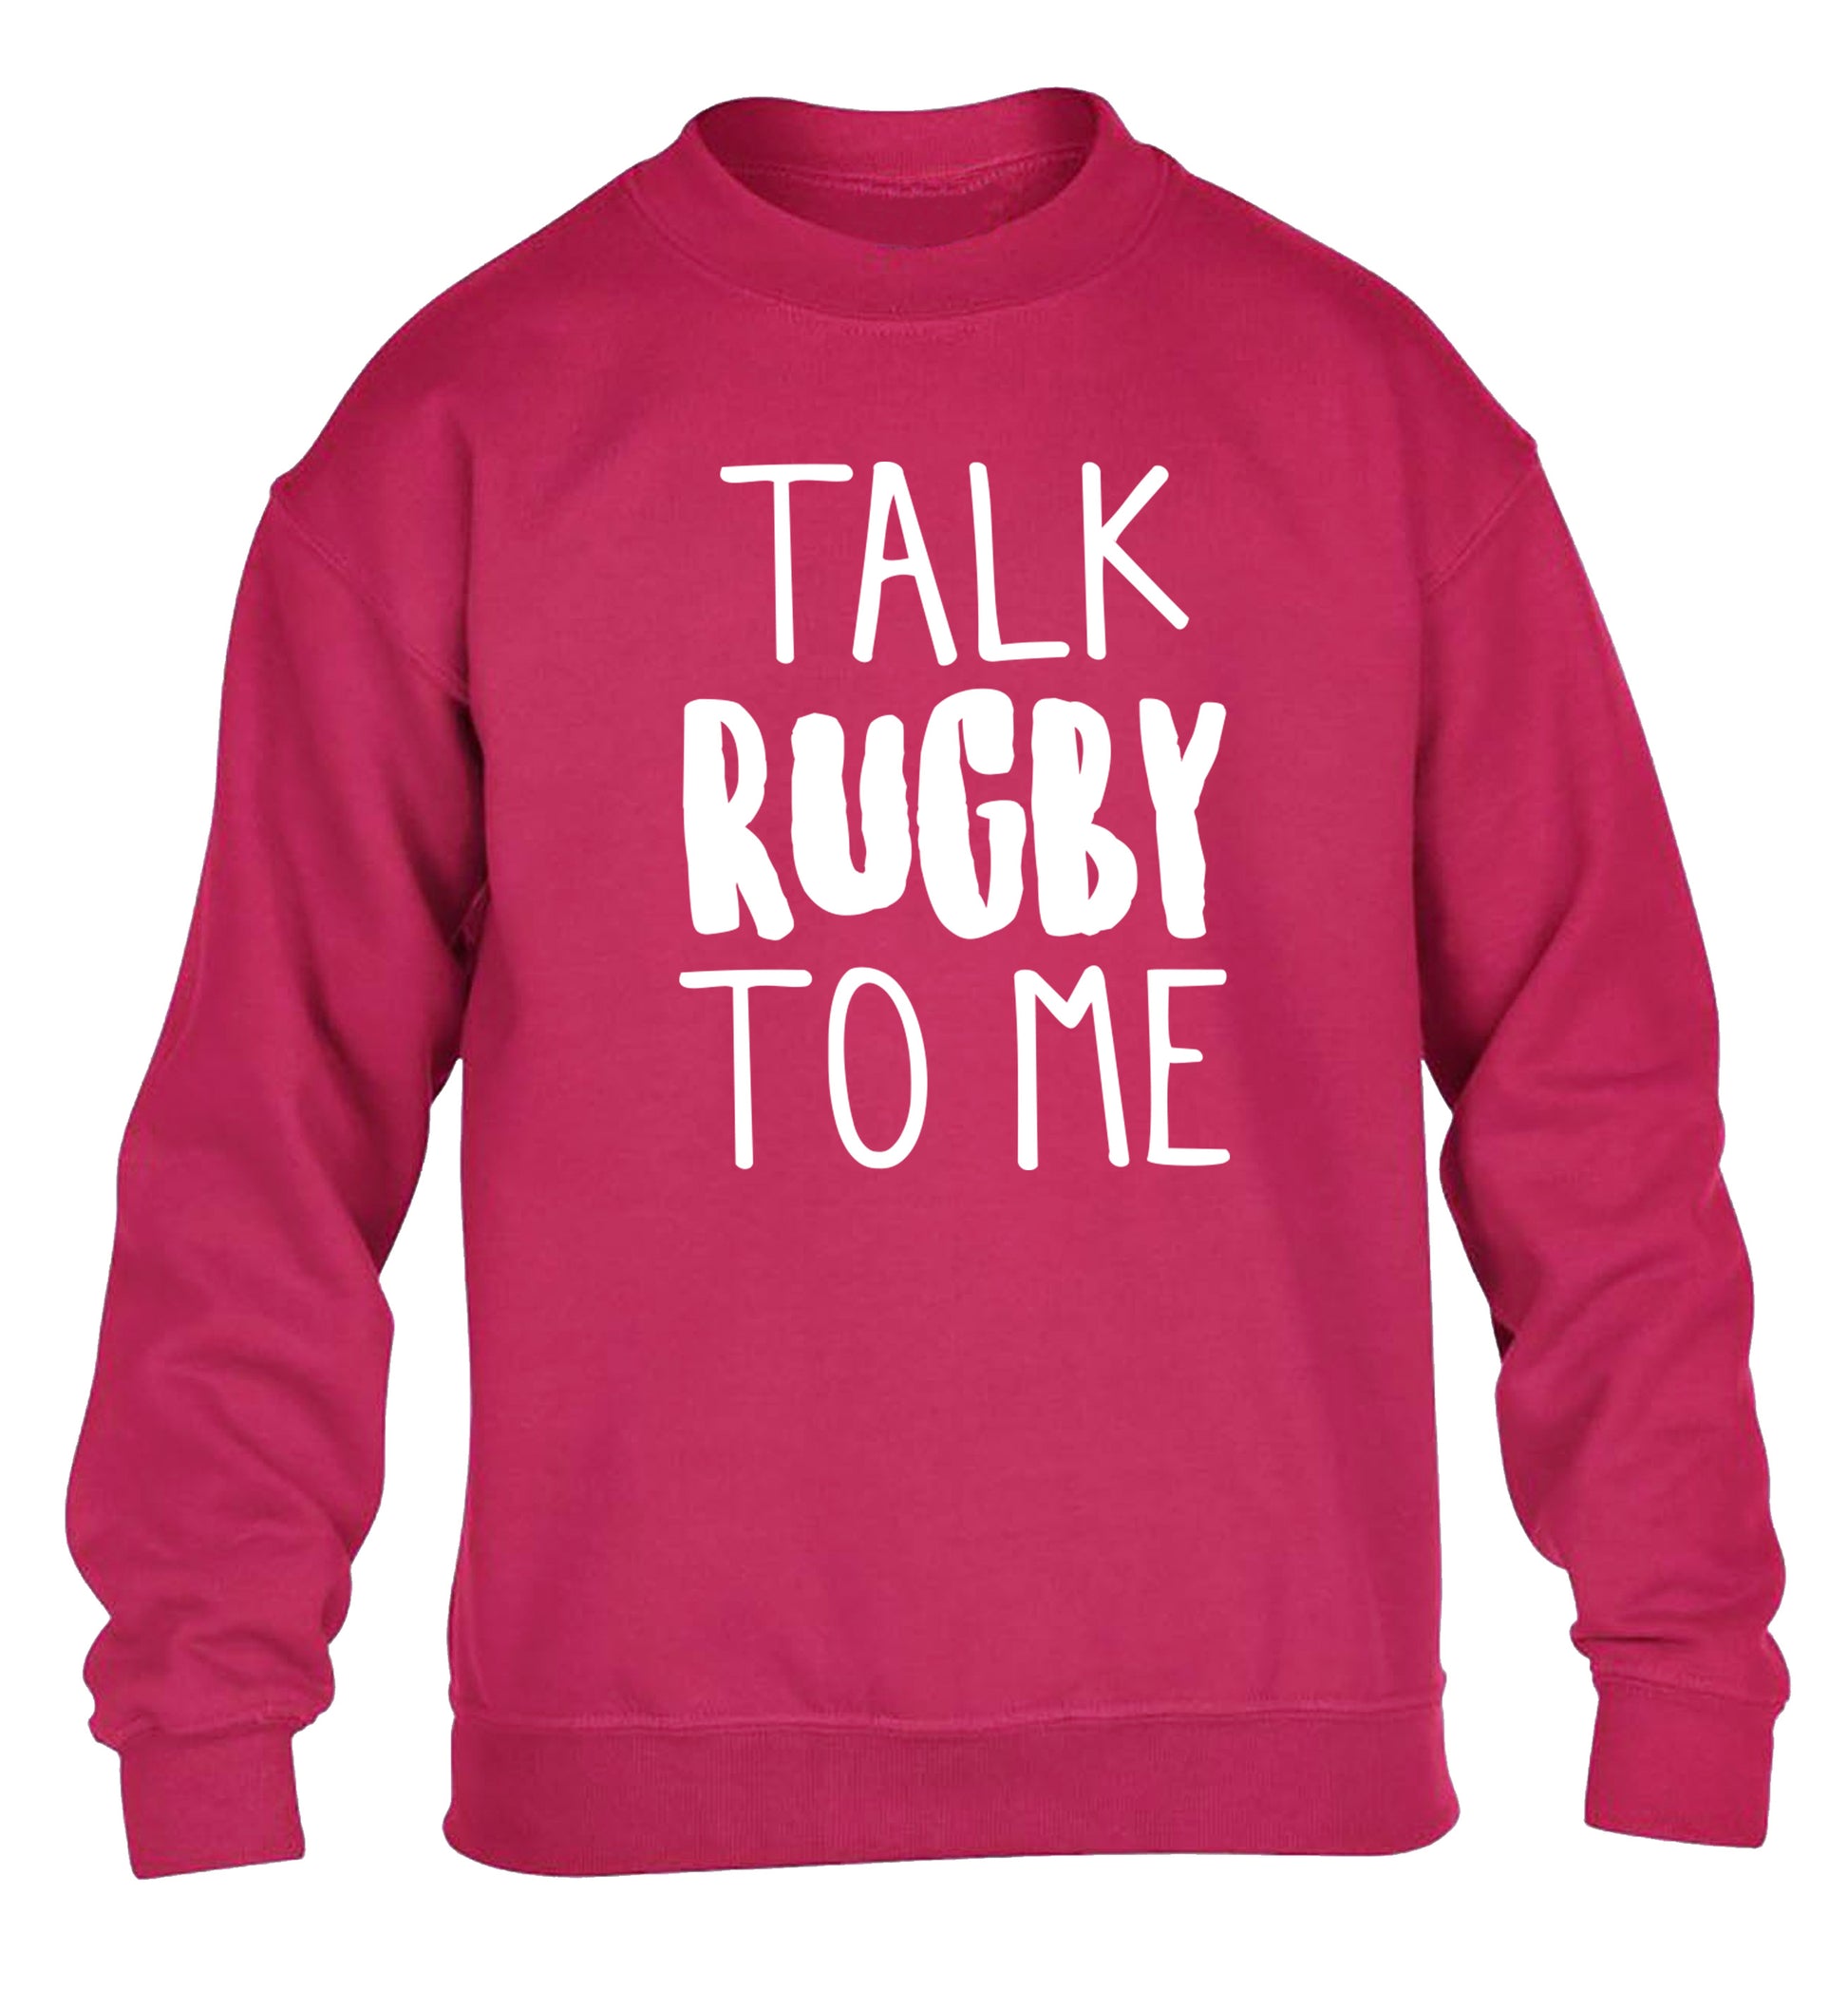 Talk rugby to me children's pink sweater 12-13 Years